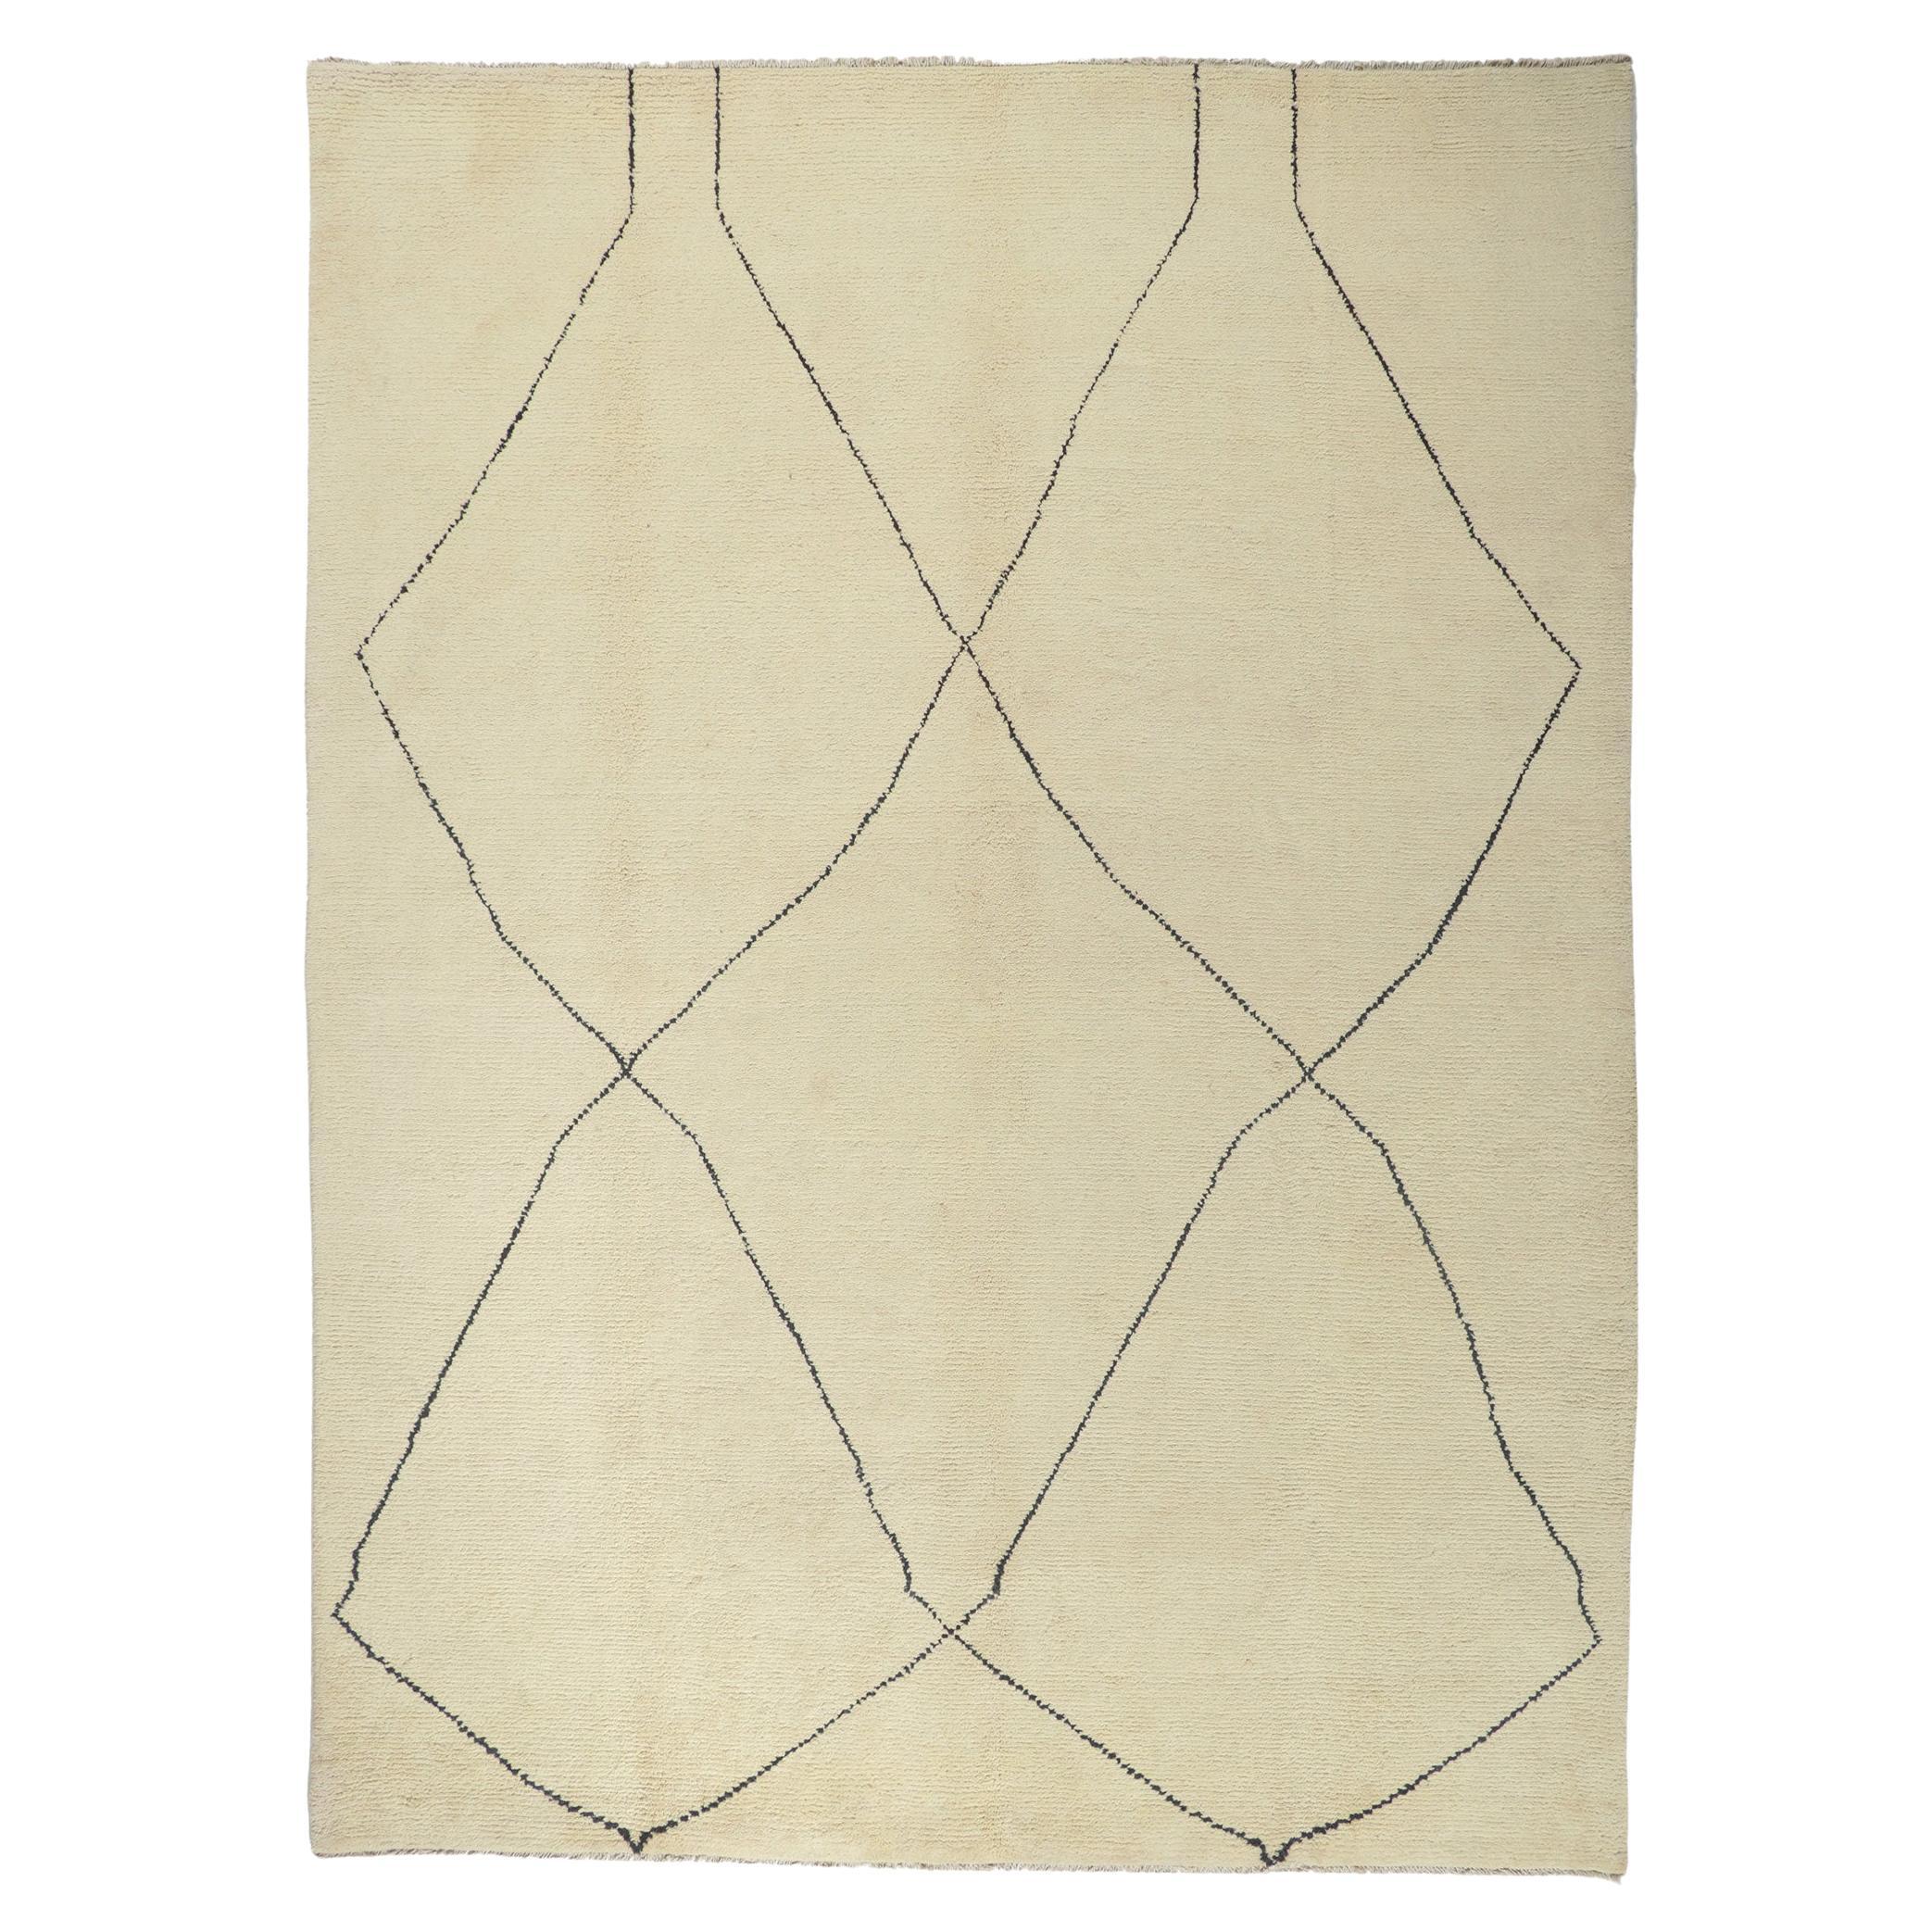 New Large Modern Moroccan Area Rug, Minimalist Style Meets Boho Chic For Sale